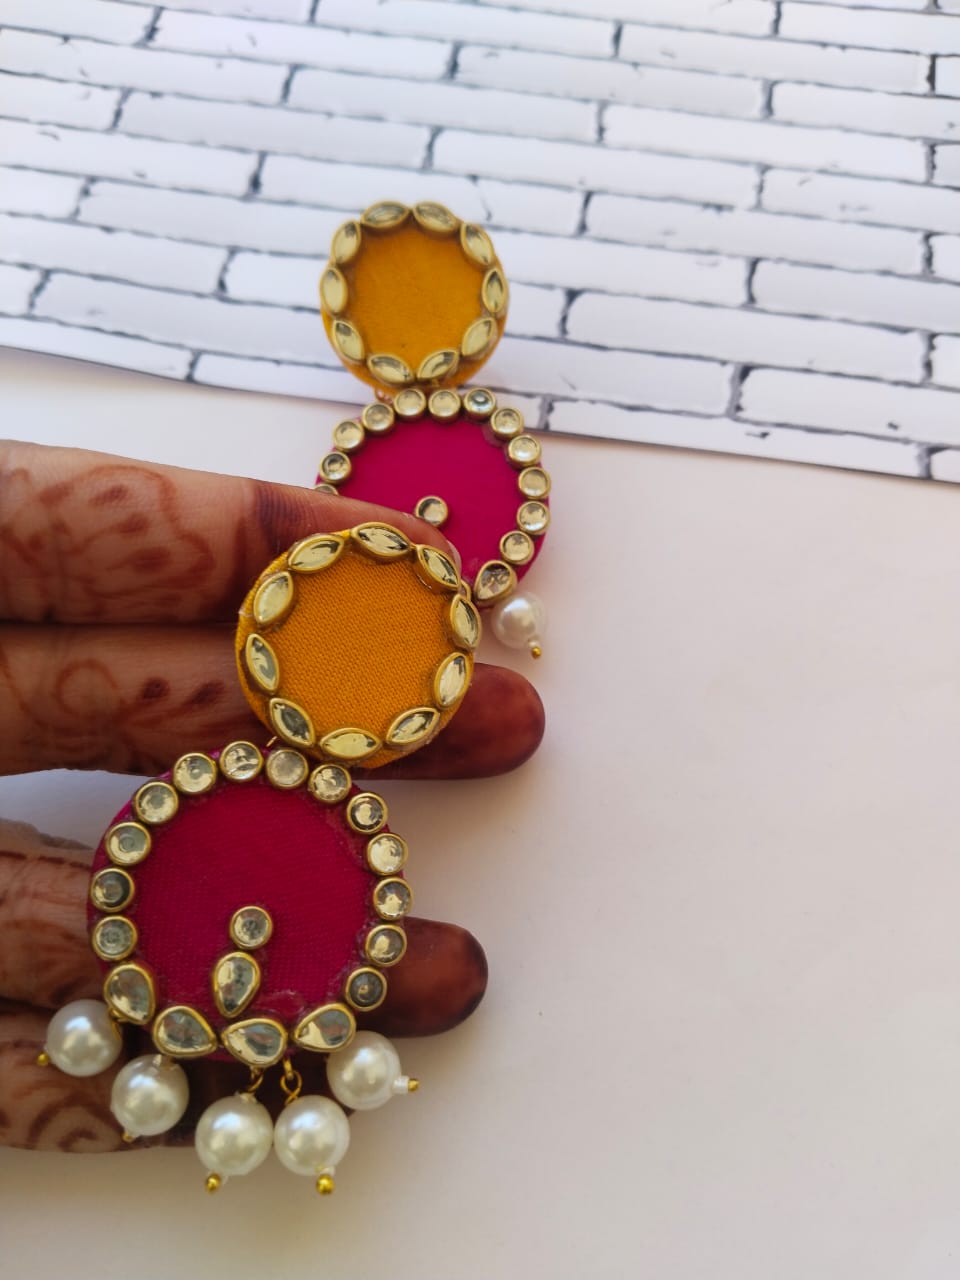 Finders holding Pink and yellow round earrings with kundan border and white pearls on white grey backdrop